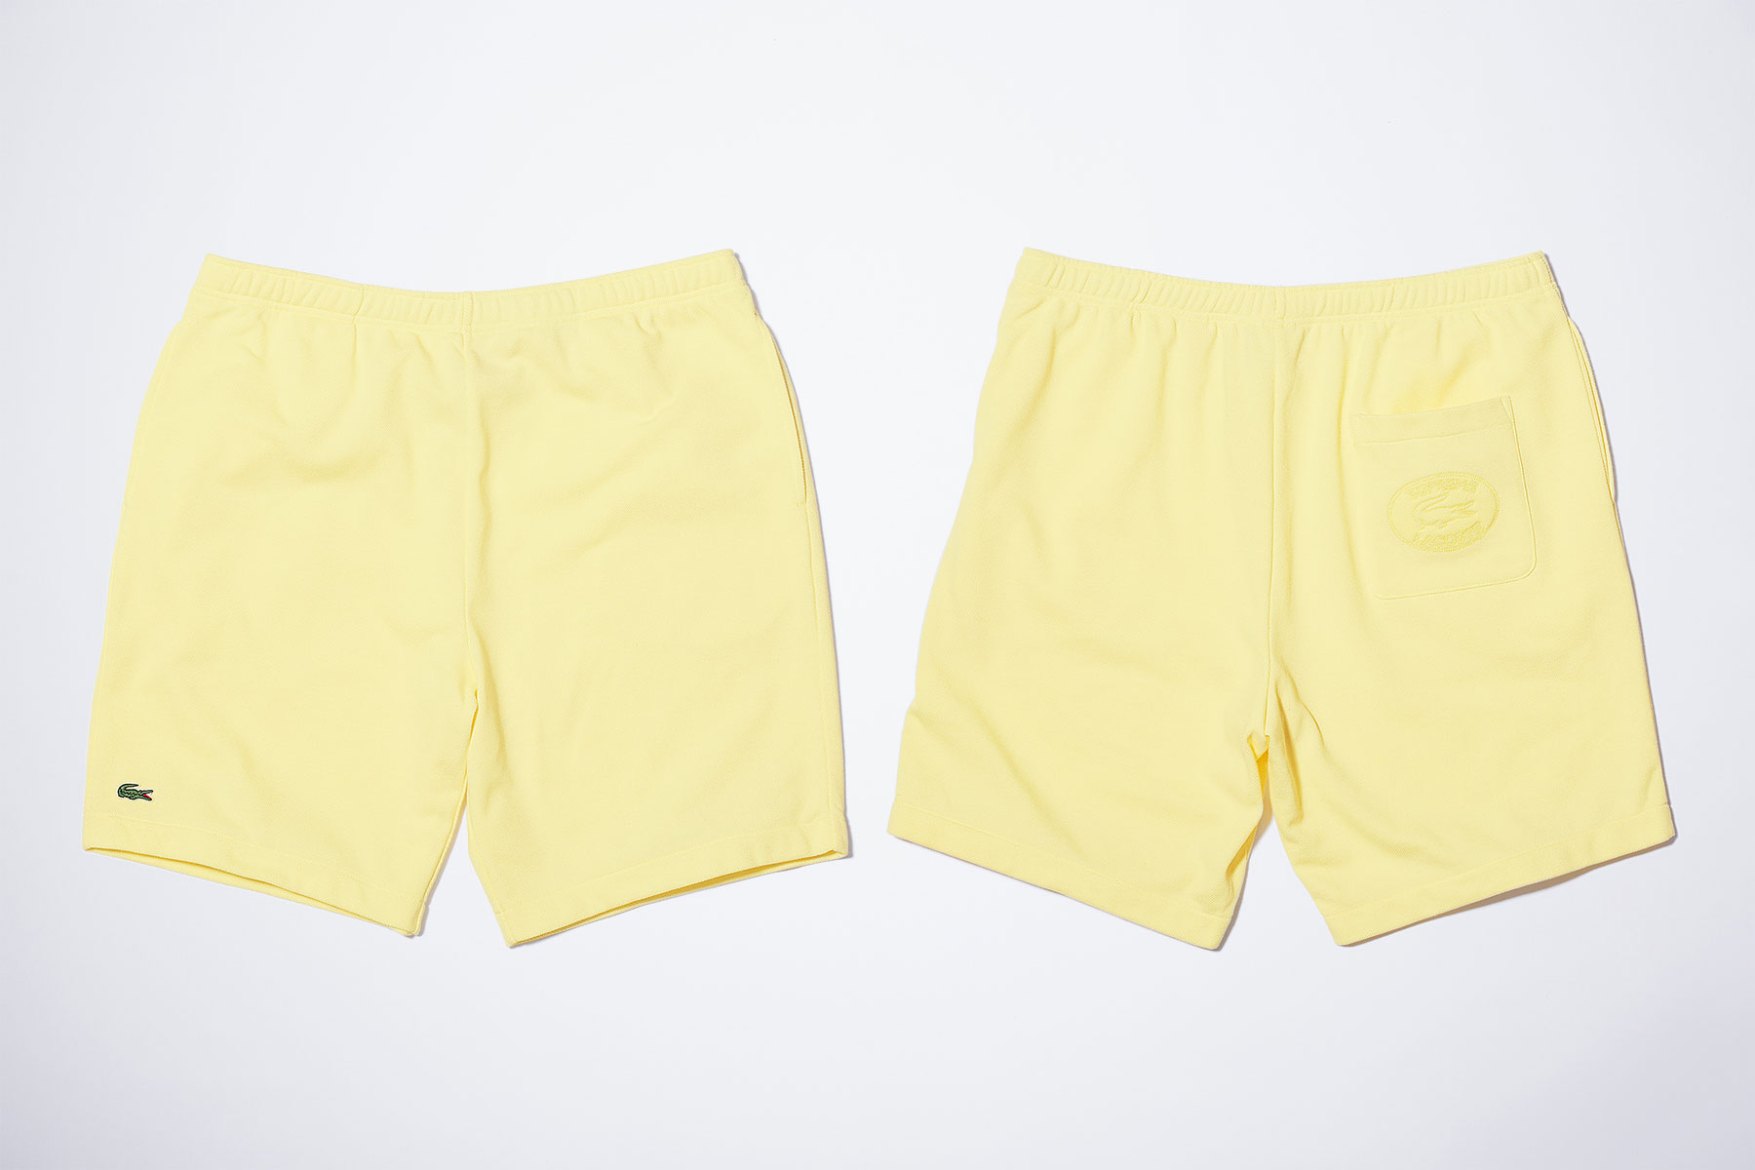 lacoste-supreme-yellow-shorts-2017-spring-summer-17